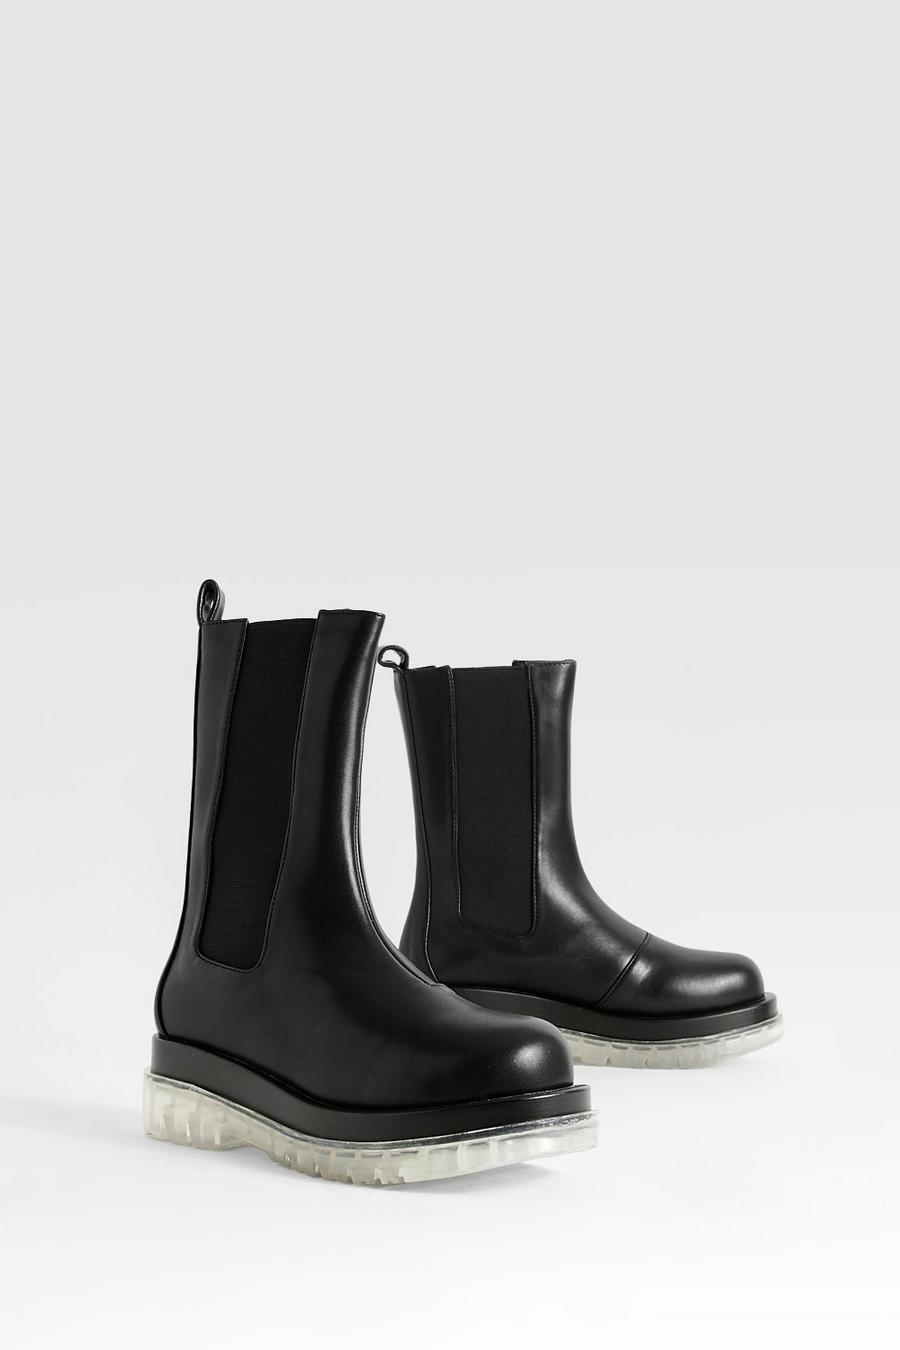 Black Contrast Sole Calf High Chelsea Boots